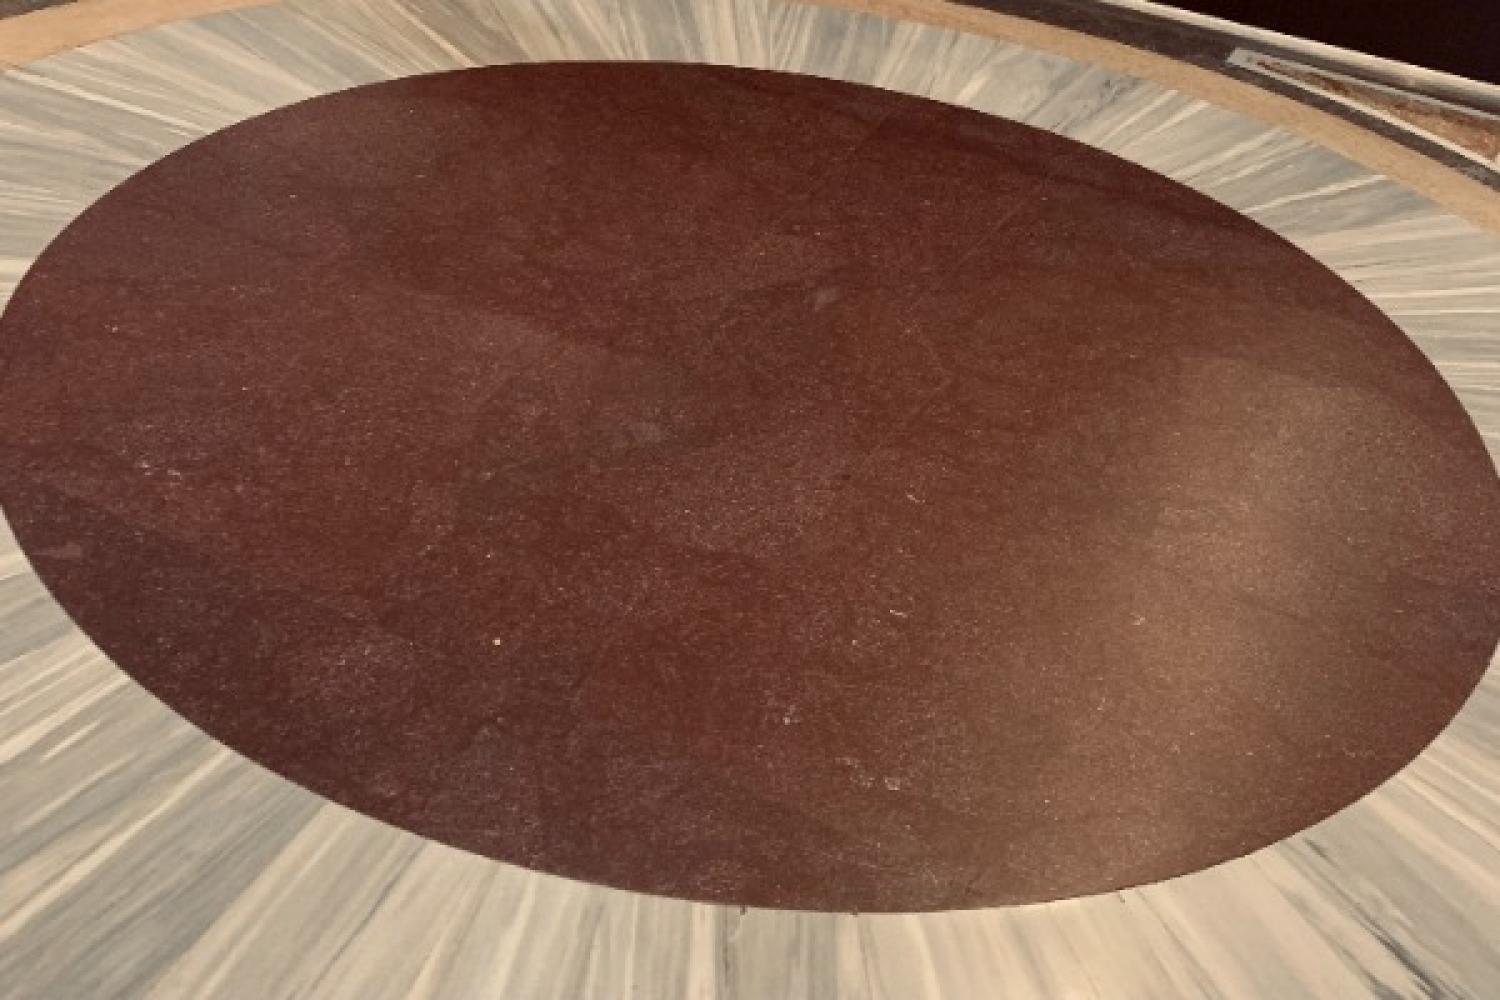 The porphyry disk in St. Peter's Basilica, on which Charlemagne was crowned Holy Roman Emperor and countless Christian pilgrims have walked.